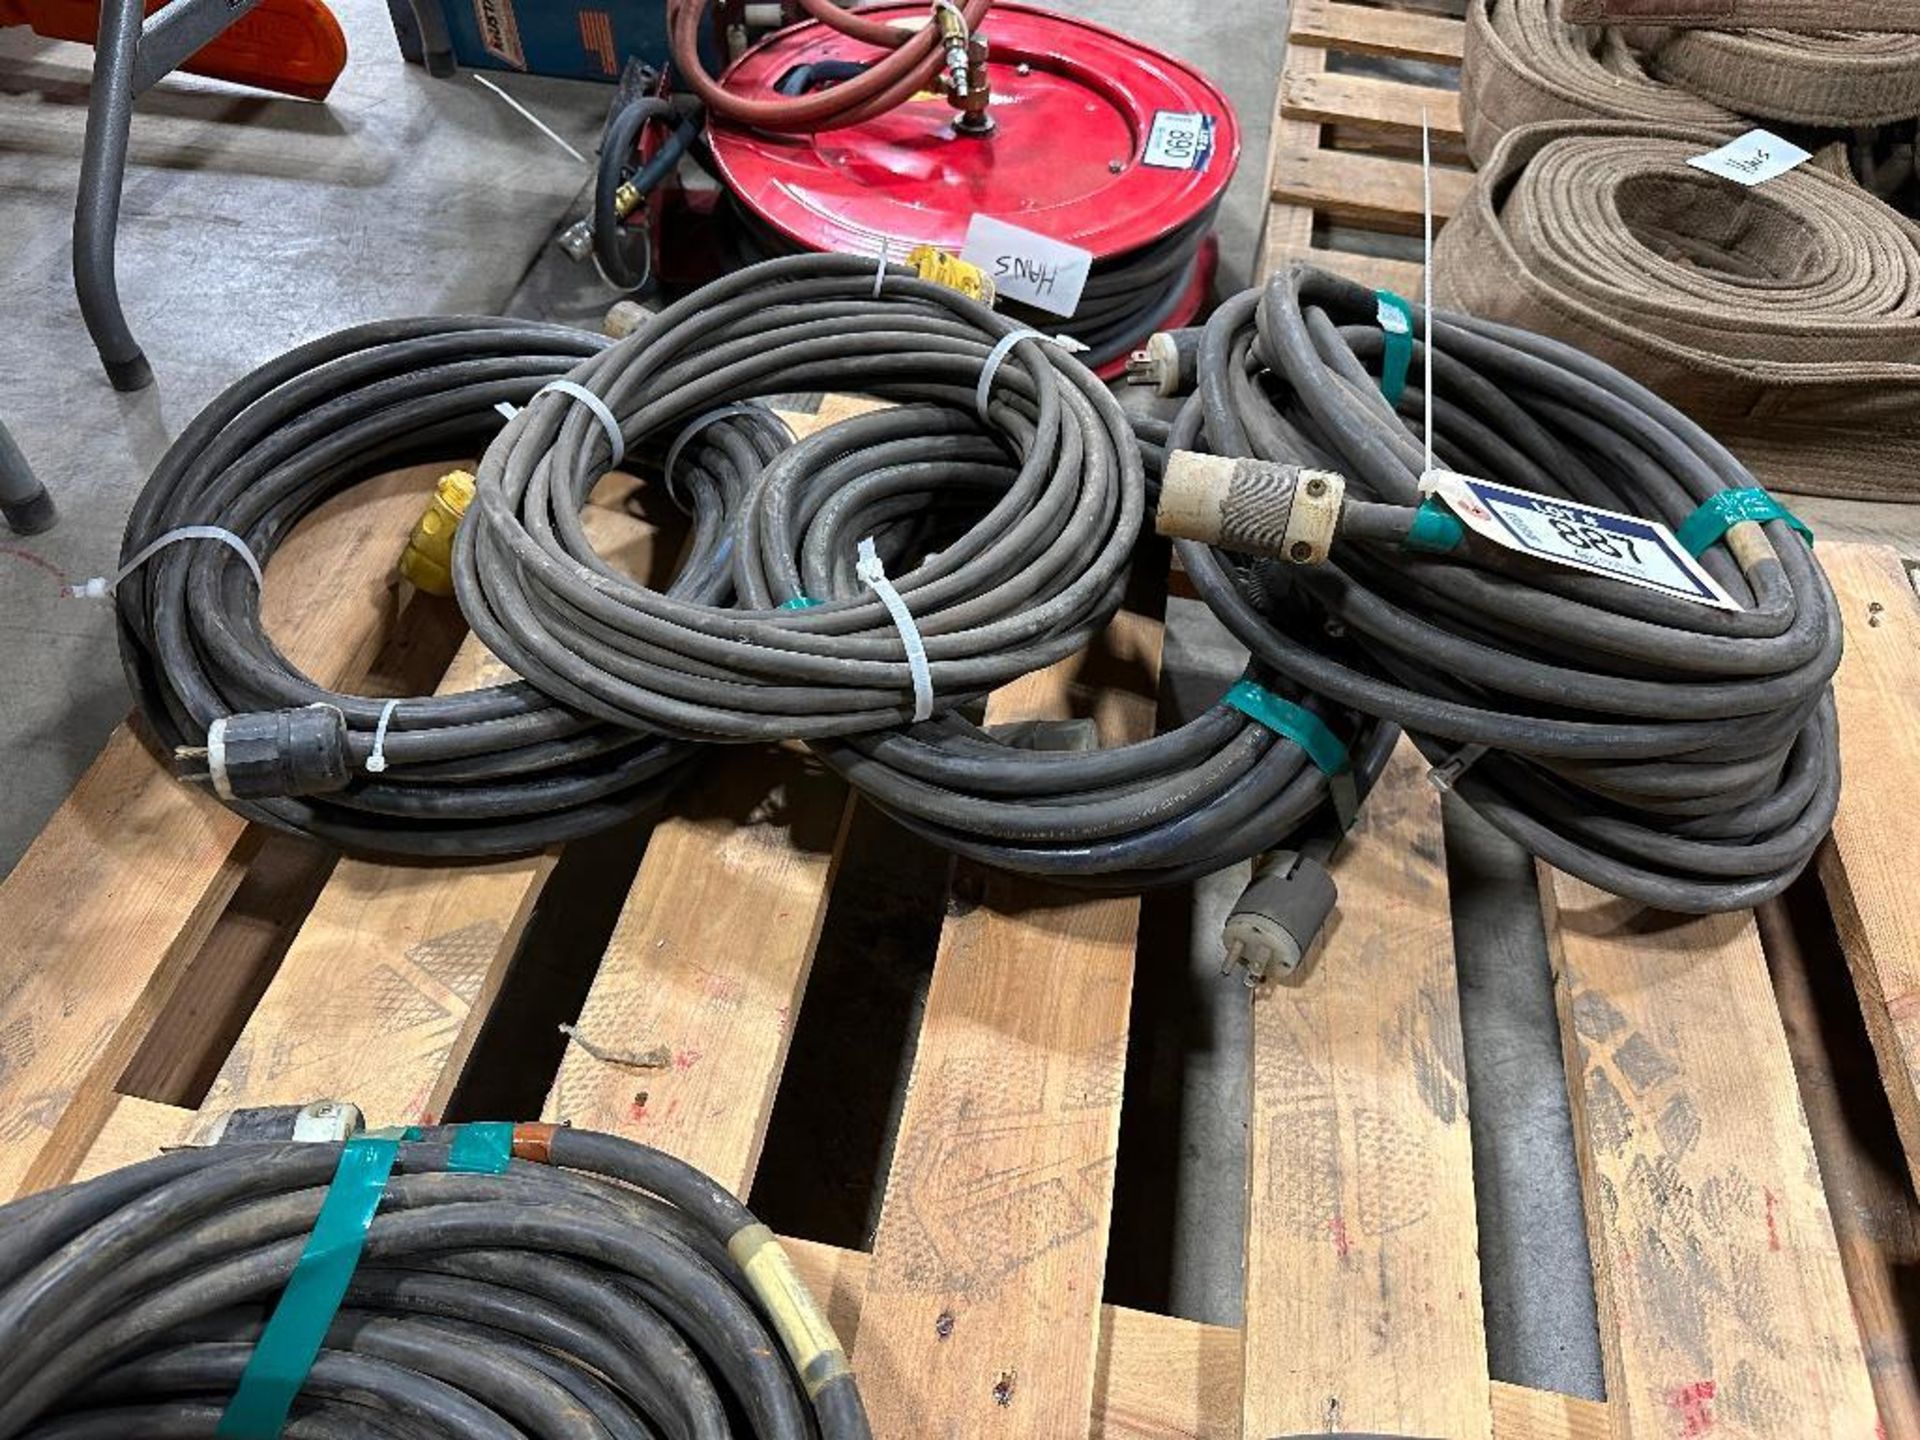 Lot of (4) Asst. Rolls of Asst. Electrical Cable - Image 2 of 3